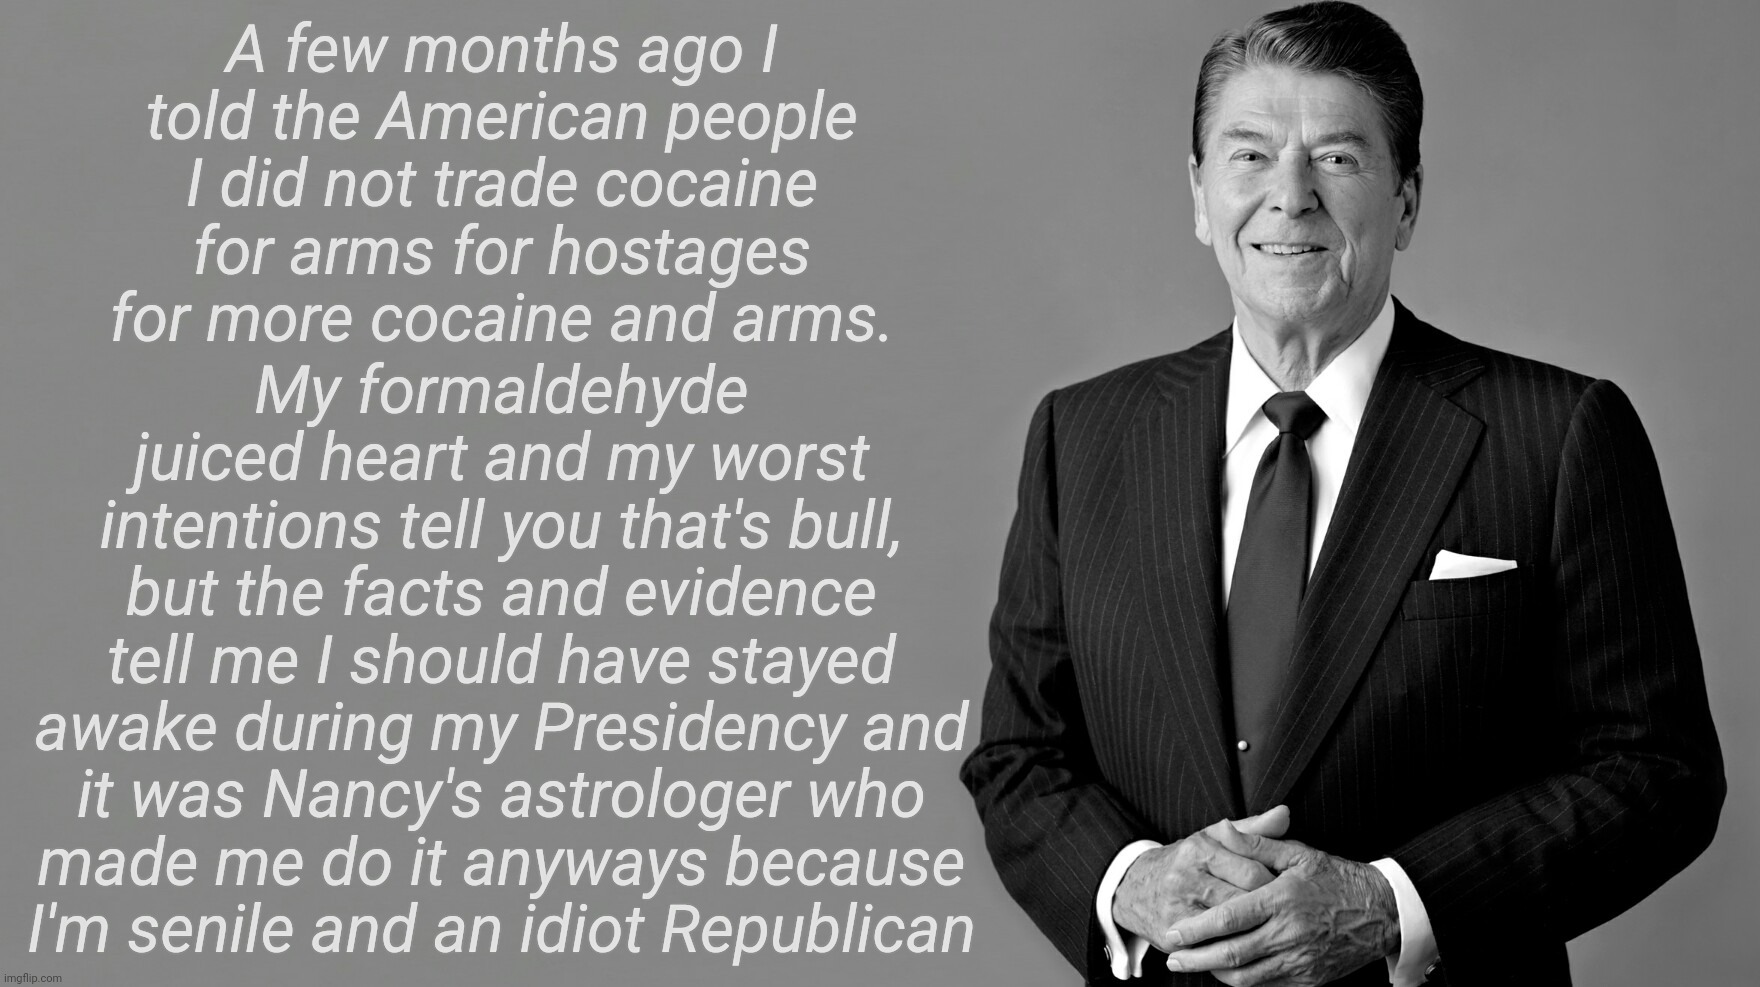 Ronald Reagan | My formaldehyde juiced heart and my worst intentions tell you that's bull, but the facts and evidence tell me I should have stayed awake during my Presidency and it was Nancy's astrologer who
made me do it anyways because
I'm senile and an idiot Republican; A few months ago I told the American people I did not trade cocaine for arms for hostages for more cocaine and arms. | image tagged in ronald reagan,ronald reagan started the crack epidemic,ronald reagan biggest cocaine dealer in history,gopee | made w/ Imgflip meme maker